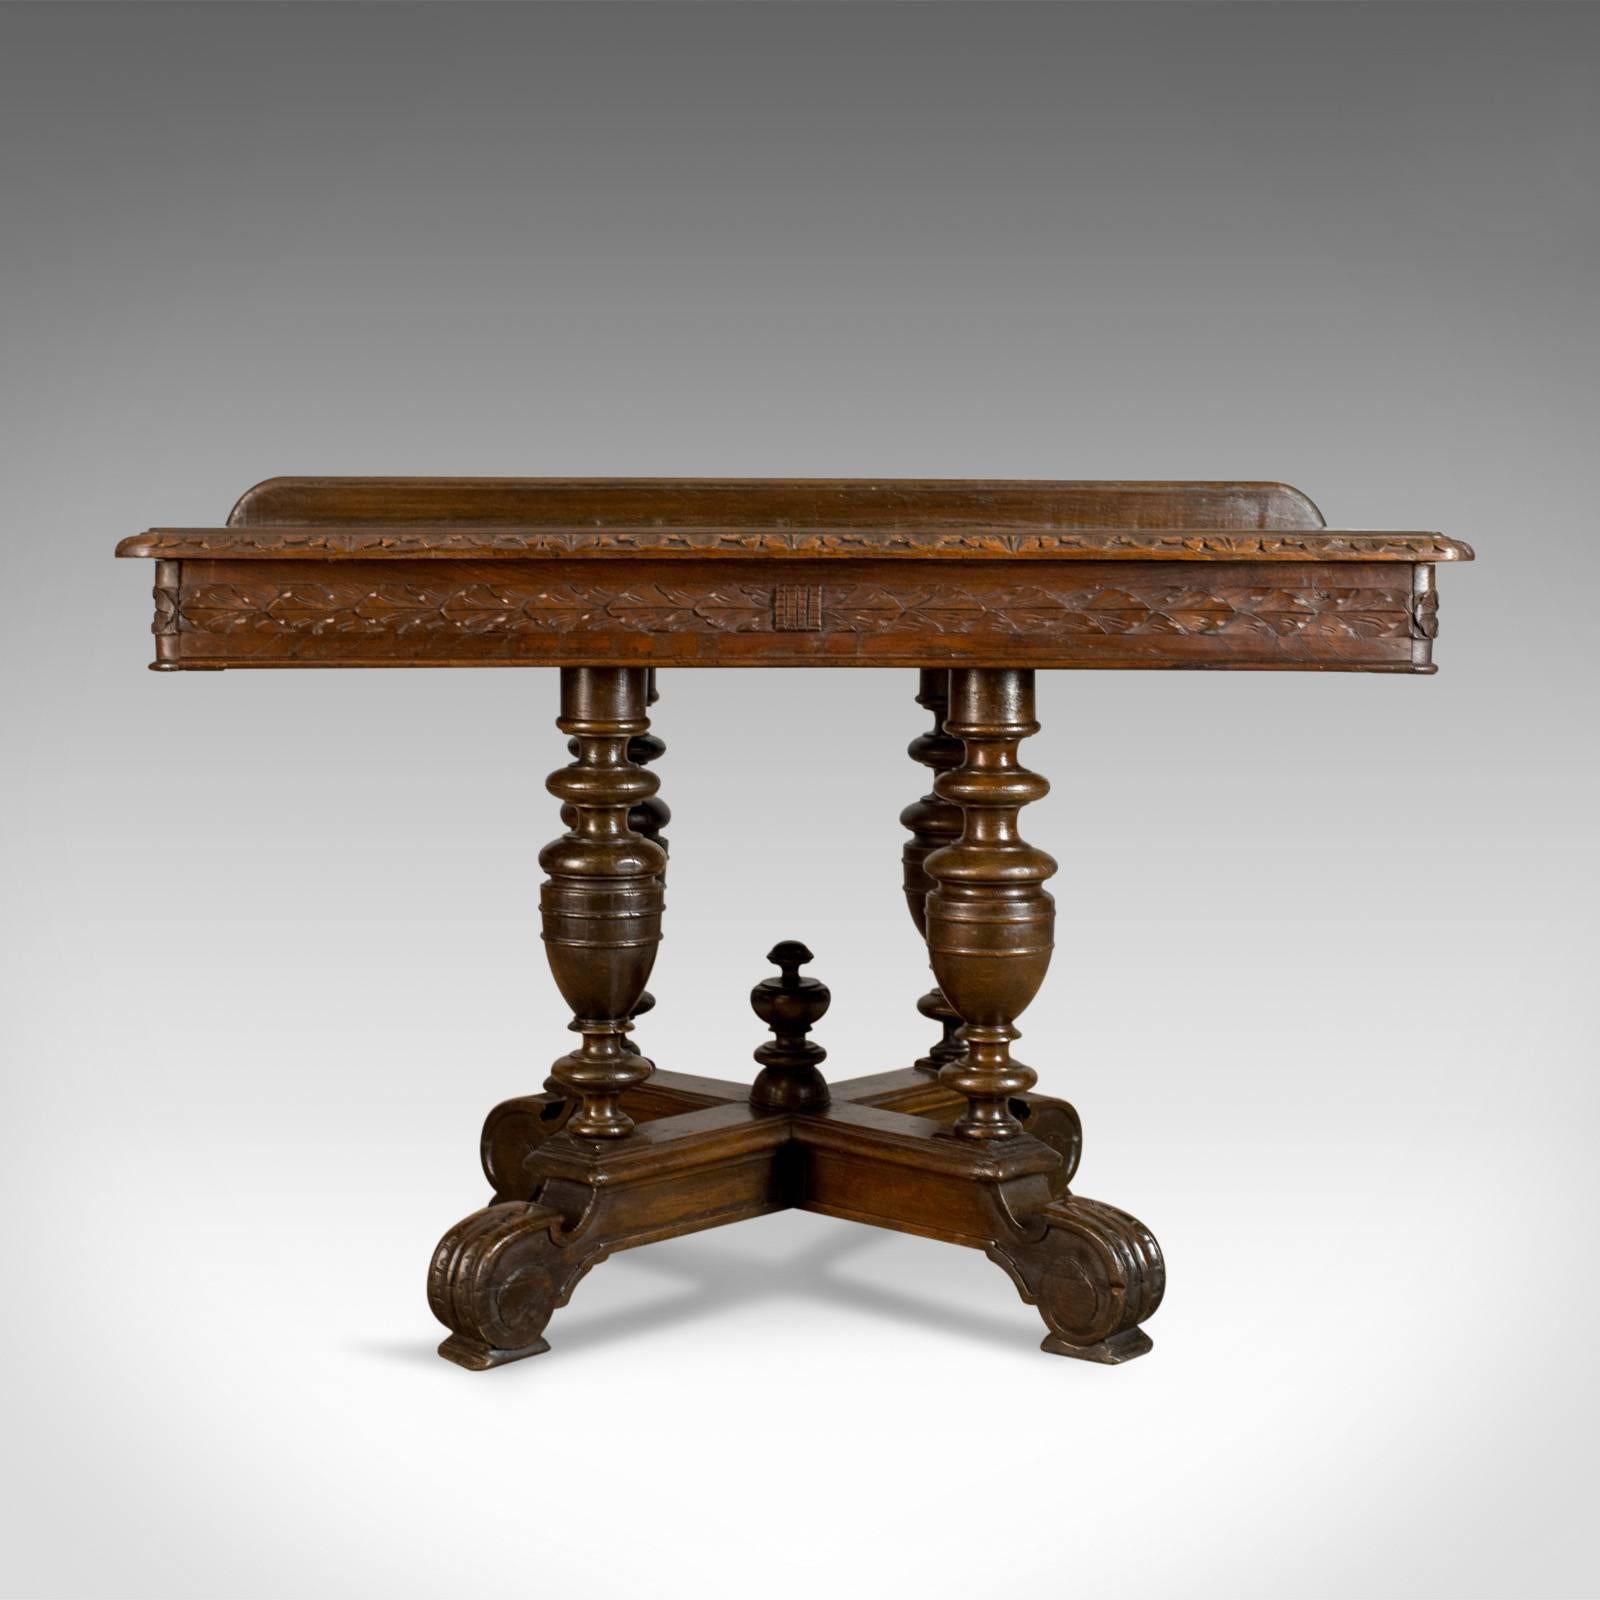 This is an antique console table, an English, oak, Victorian side table dating to the late 19th century, circa 1880.

Deep, rich tones to the dark English oak
Grain interest and a desirable aged patina
Up-stand and rear projection, ideal for